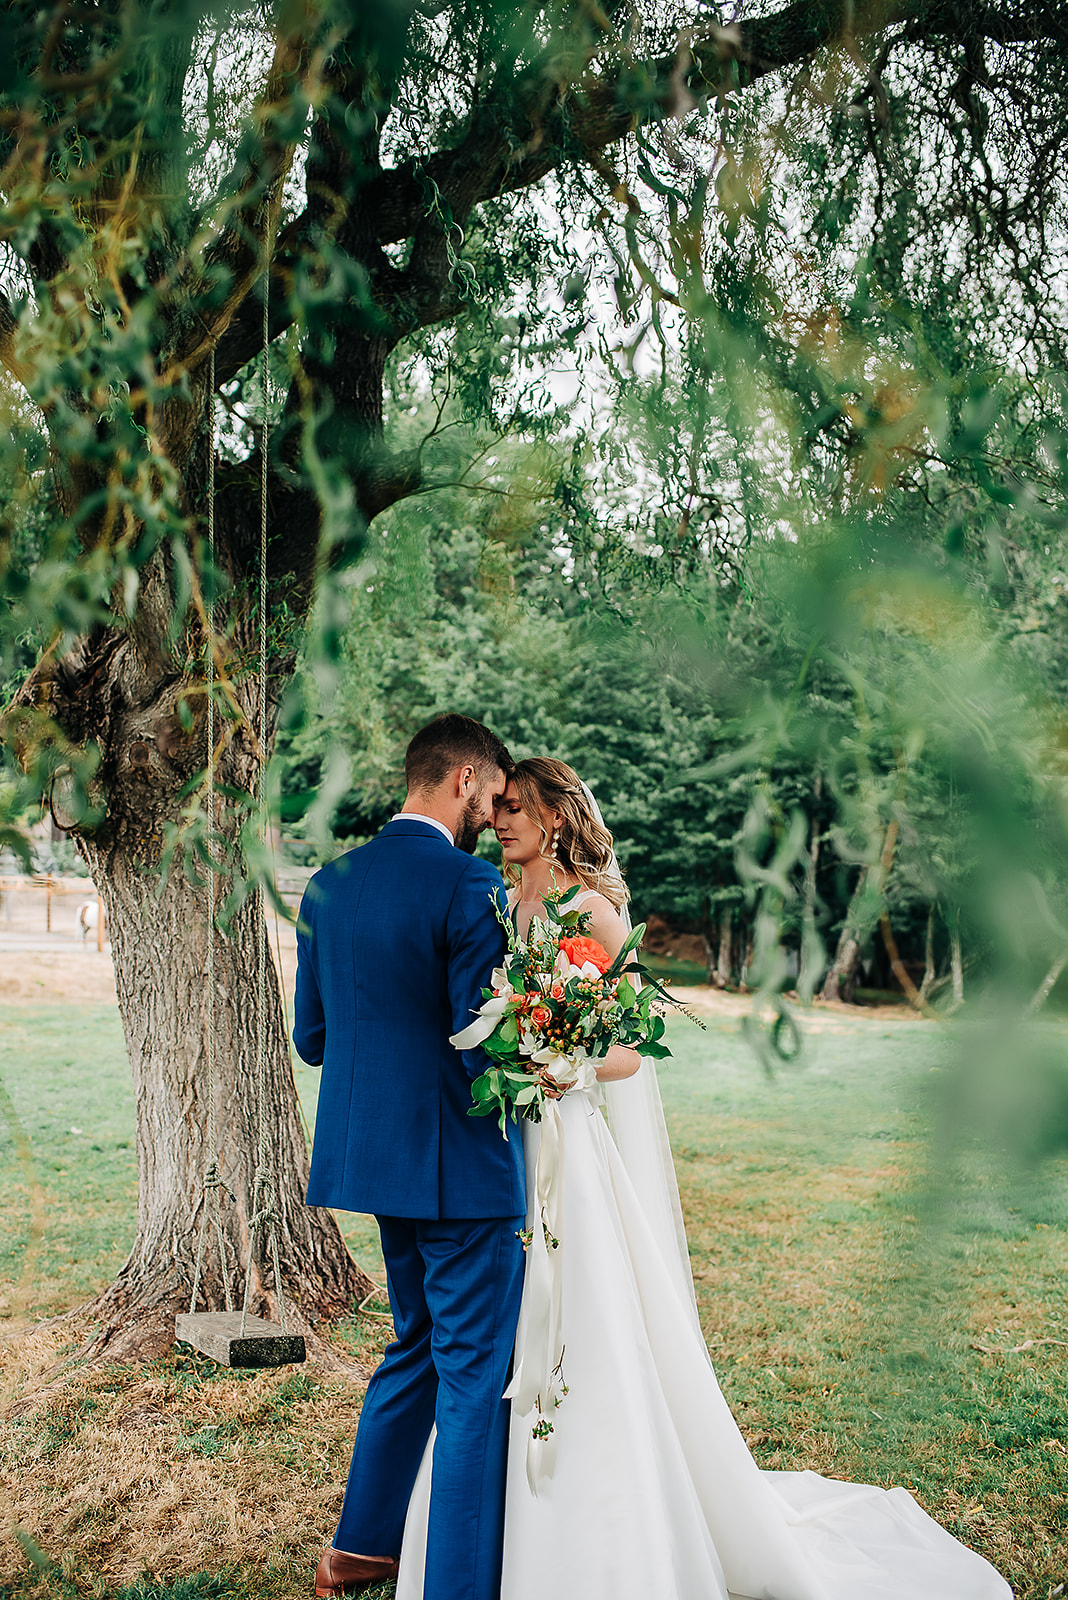 Fireseed Catering, Fireseed Catering Wedding, Whidbey Island Wedding, Seattle Wedding Photographer, Captured by Candace Photography